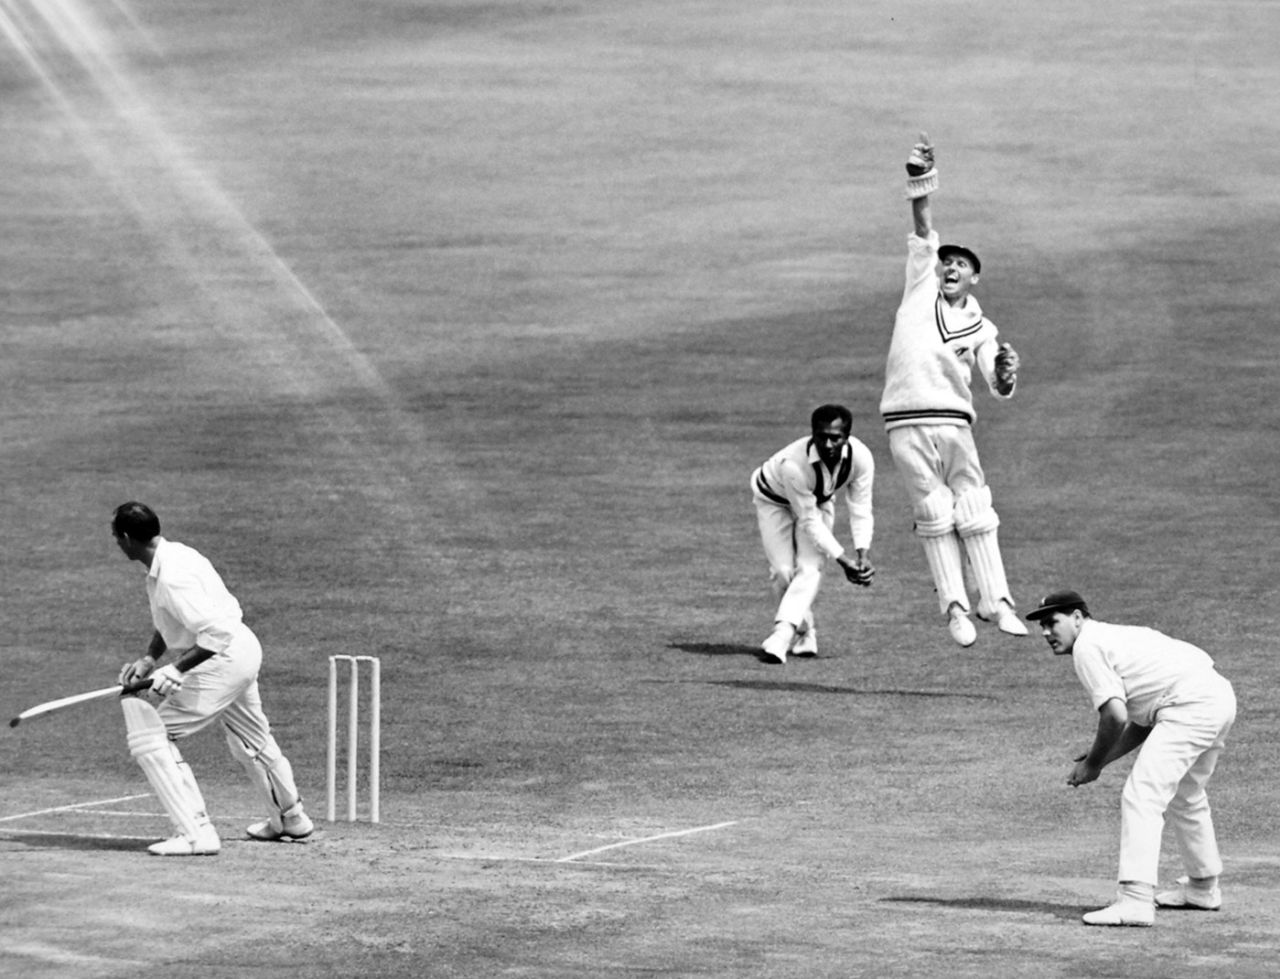 Alan Smith appeals for an lbw against Eric Russell, Middlesex v Warwickshire, County Championship, day three, Lord's, July 19, 1968